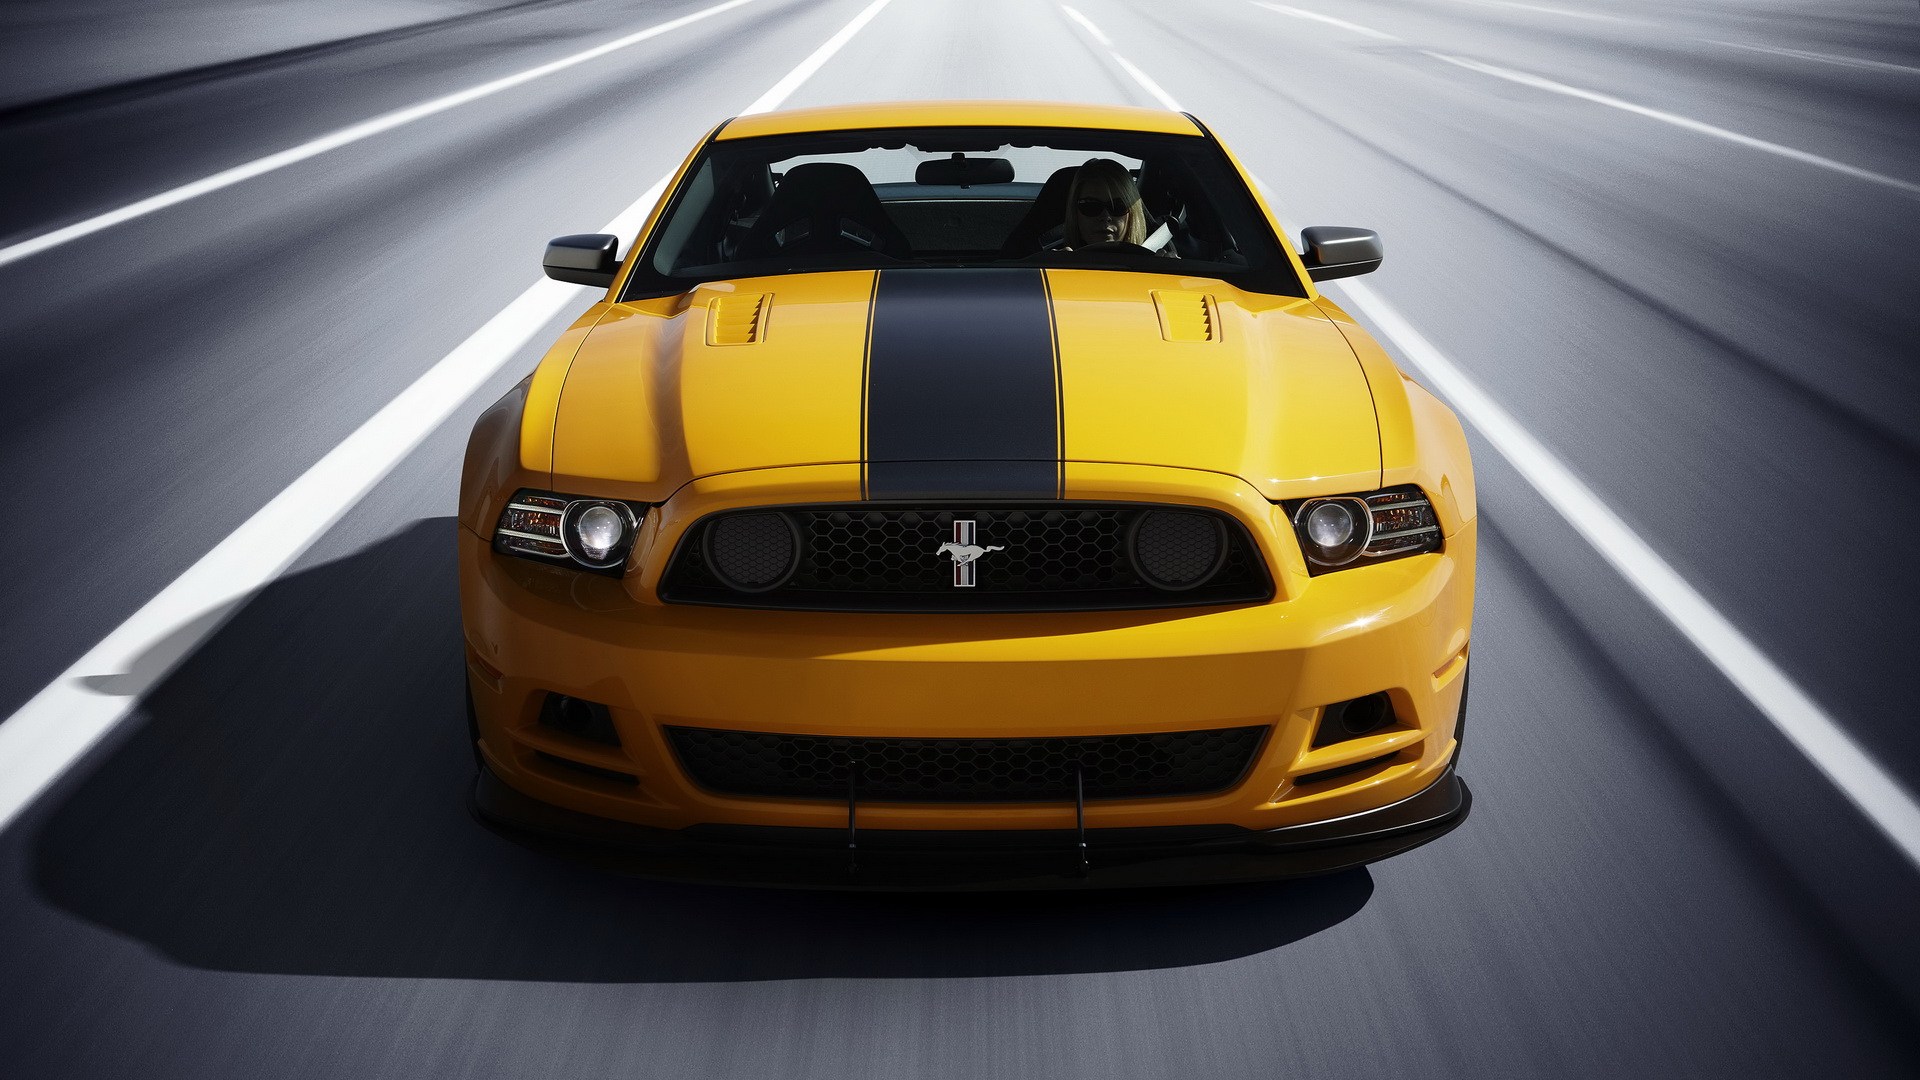 Ford Mustang And Chevrolet Camaro Comparison - HD Wallpaper 